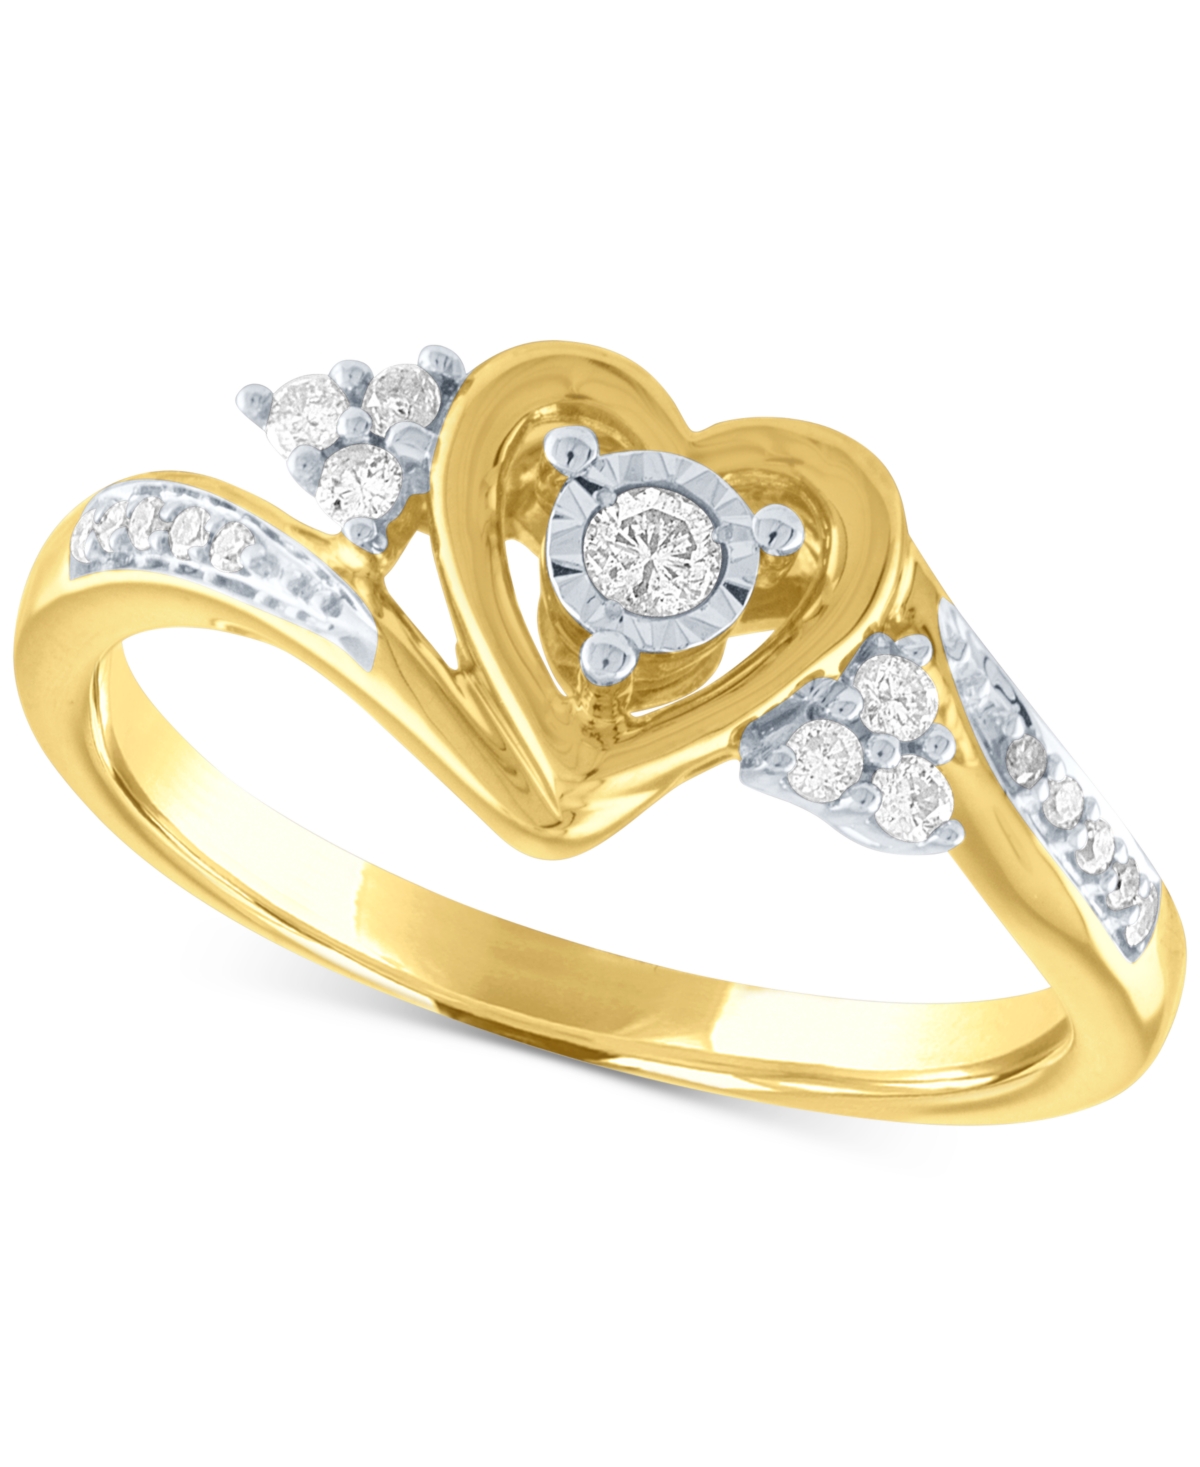 Diamond Heart Promise Ring (1/6 ct. t.w.) in 14k Gold Over Sterling Silver - Yellow Gold/Silver